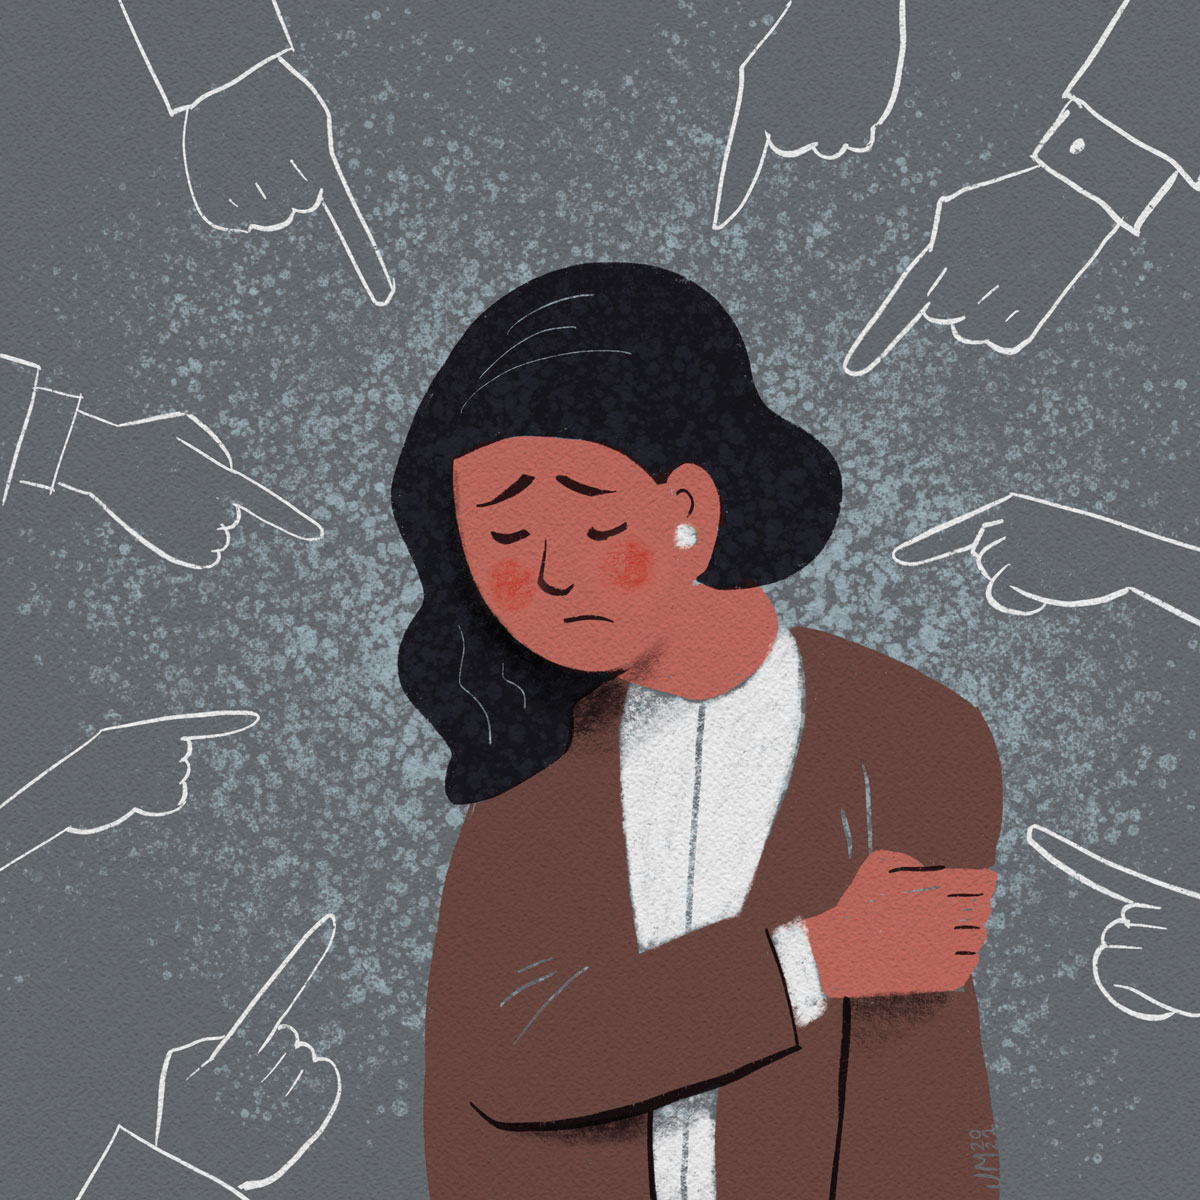 Illustration of fingers pointing at woman who feels ashamed